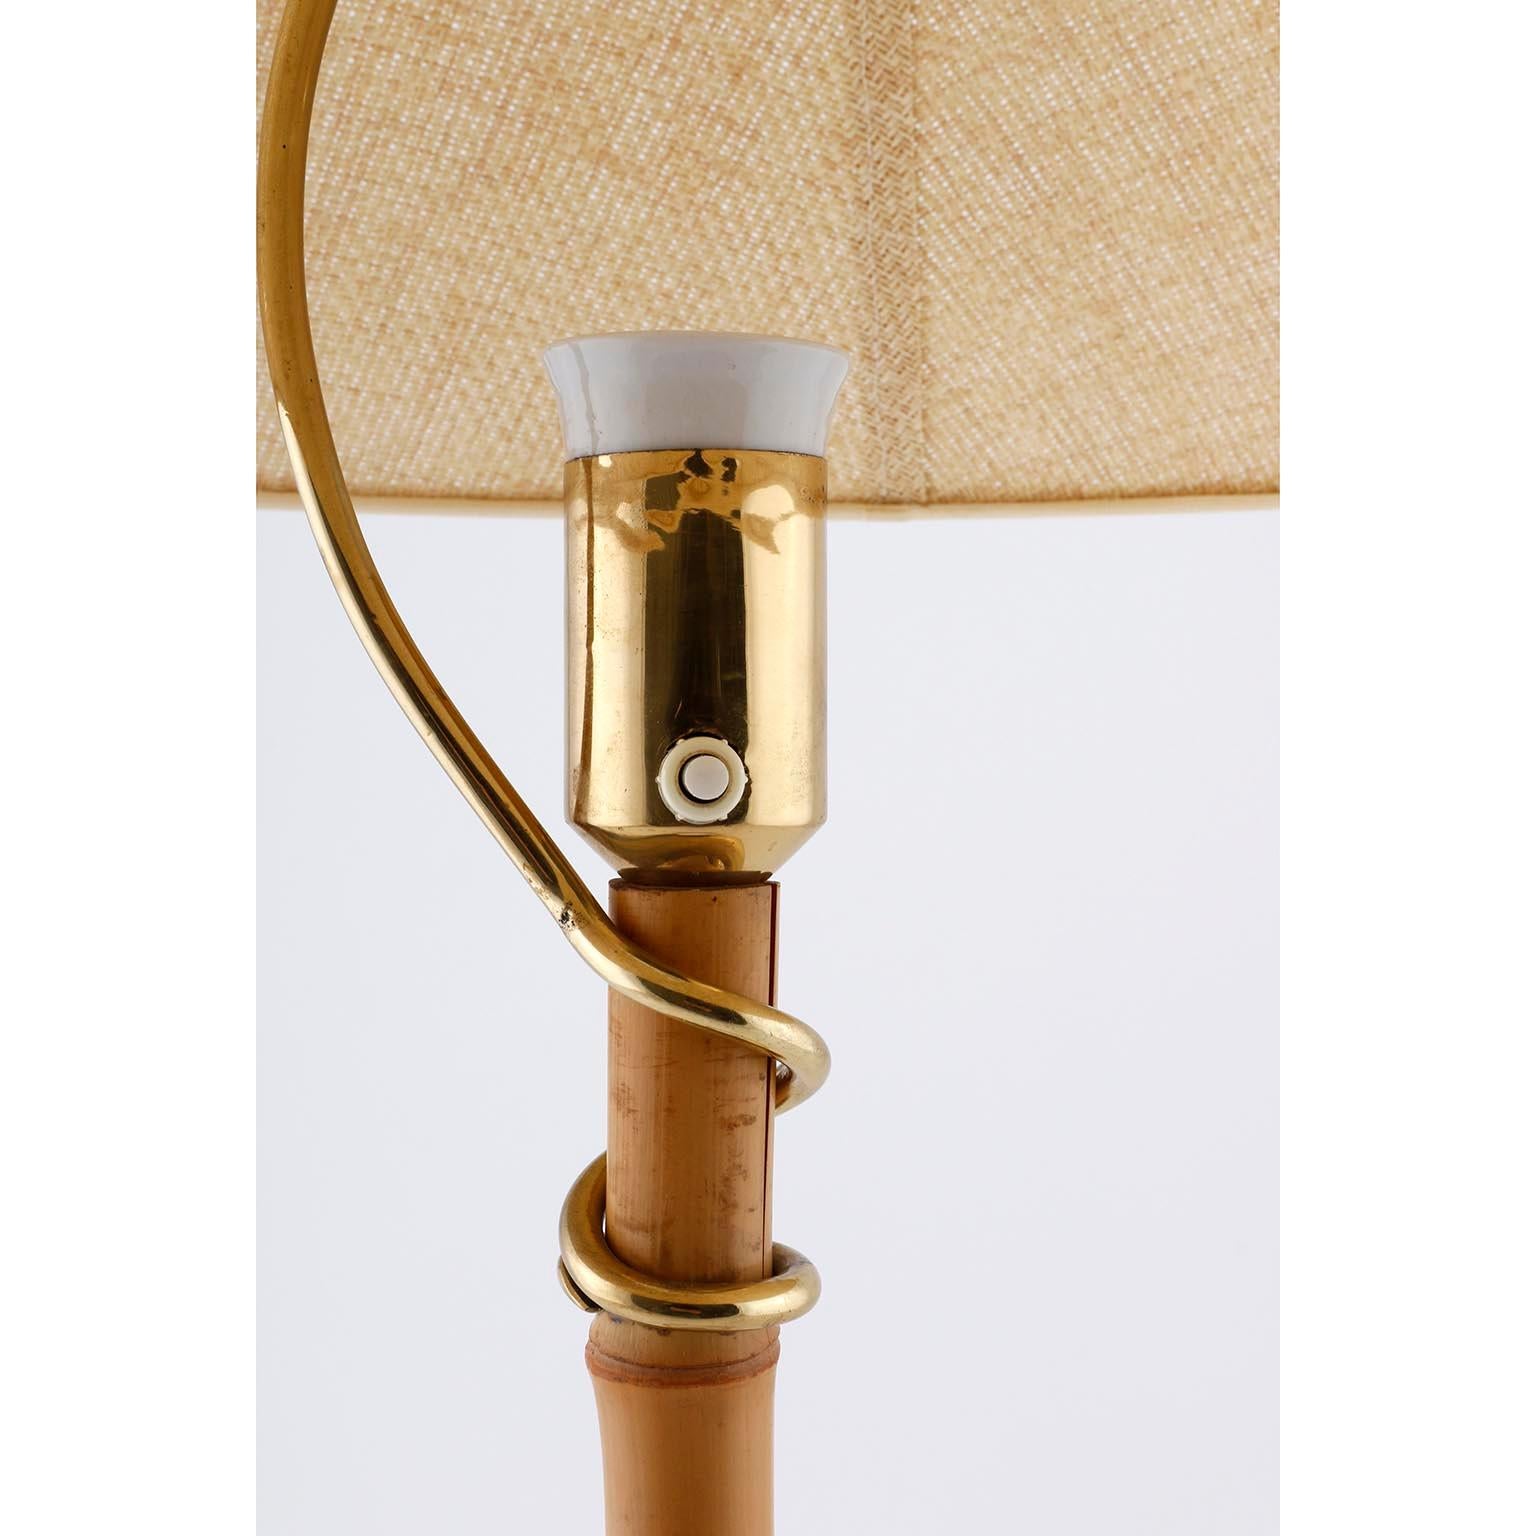 Mid-20th Century Large Table Lamp, Brass Bamboo Cane Wicker Shade, attr. J.T. Kalmar, 1950s For Sale